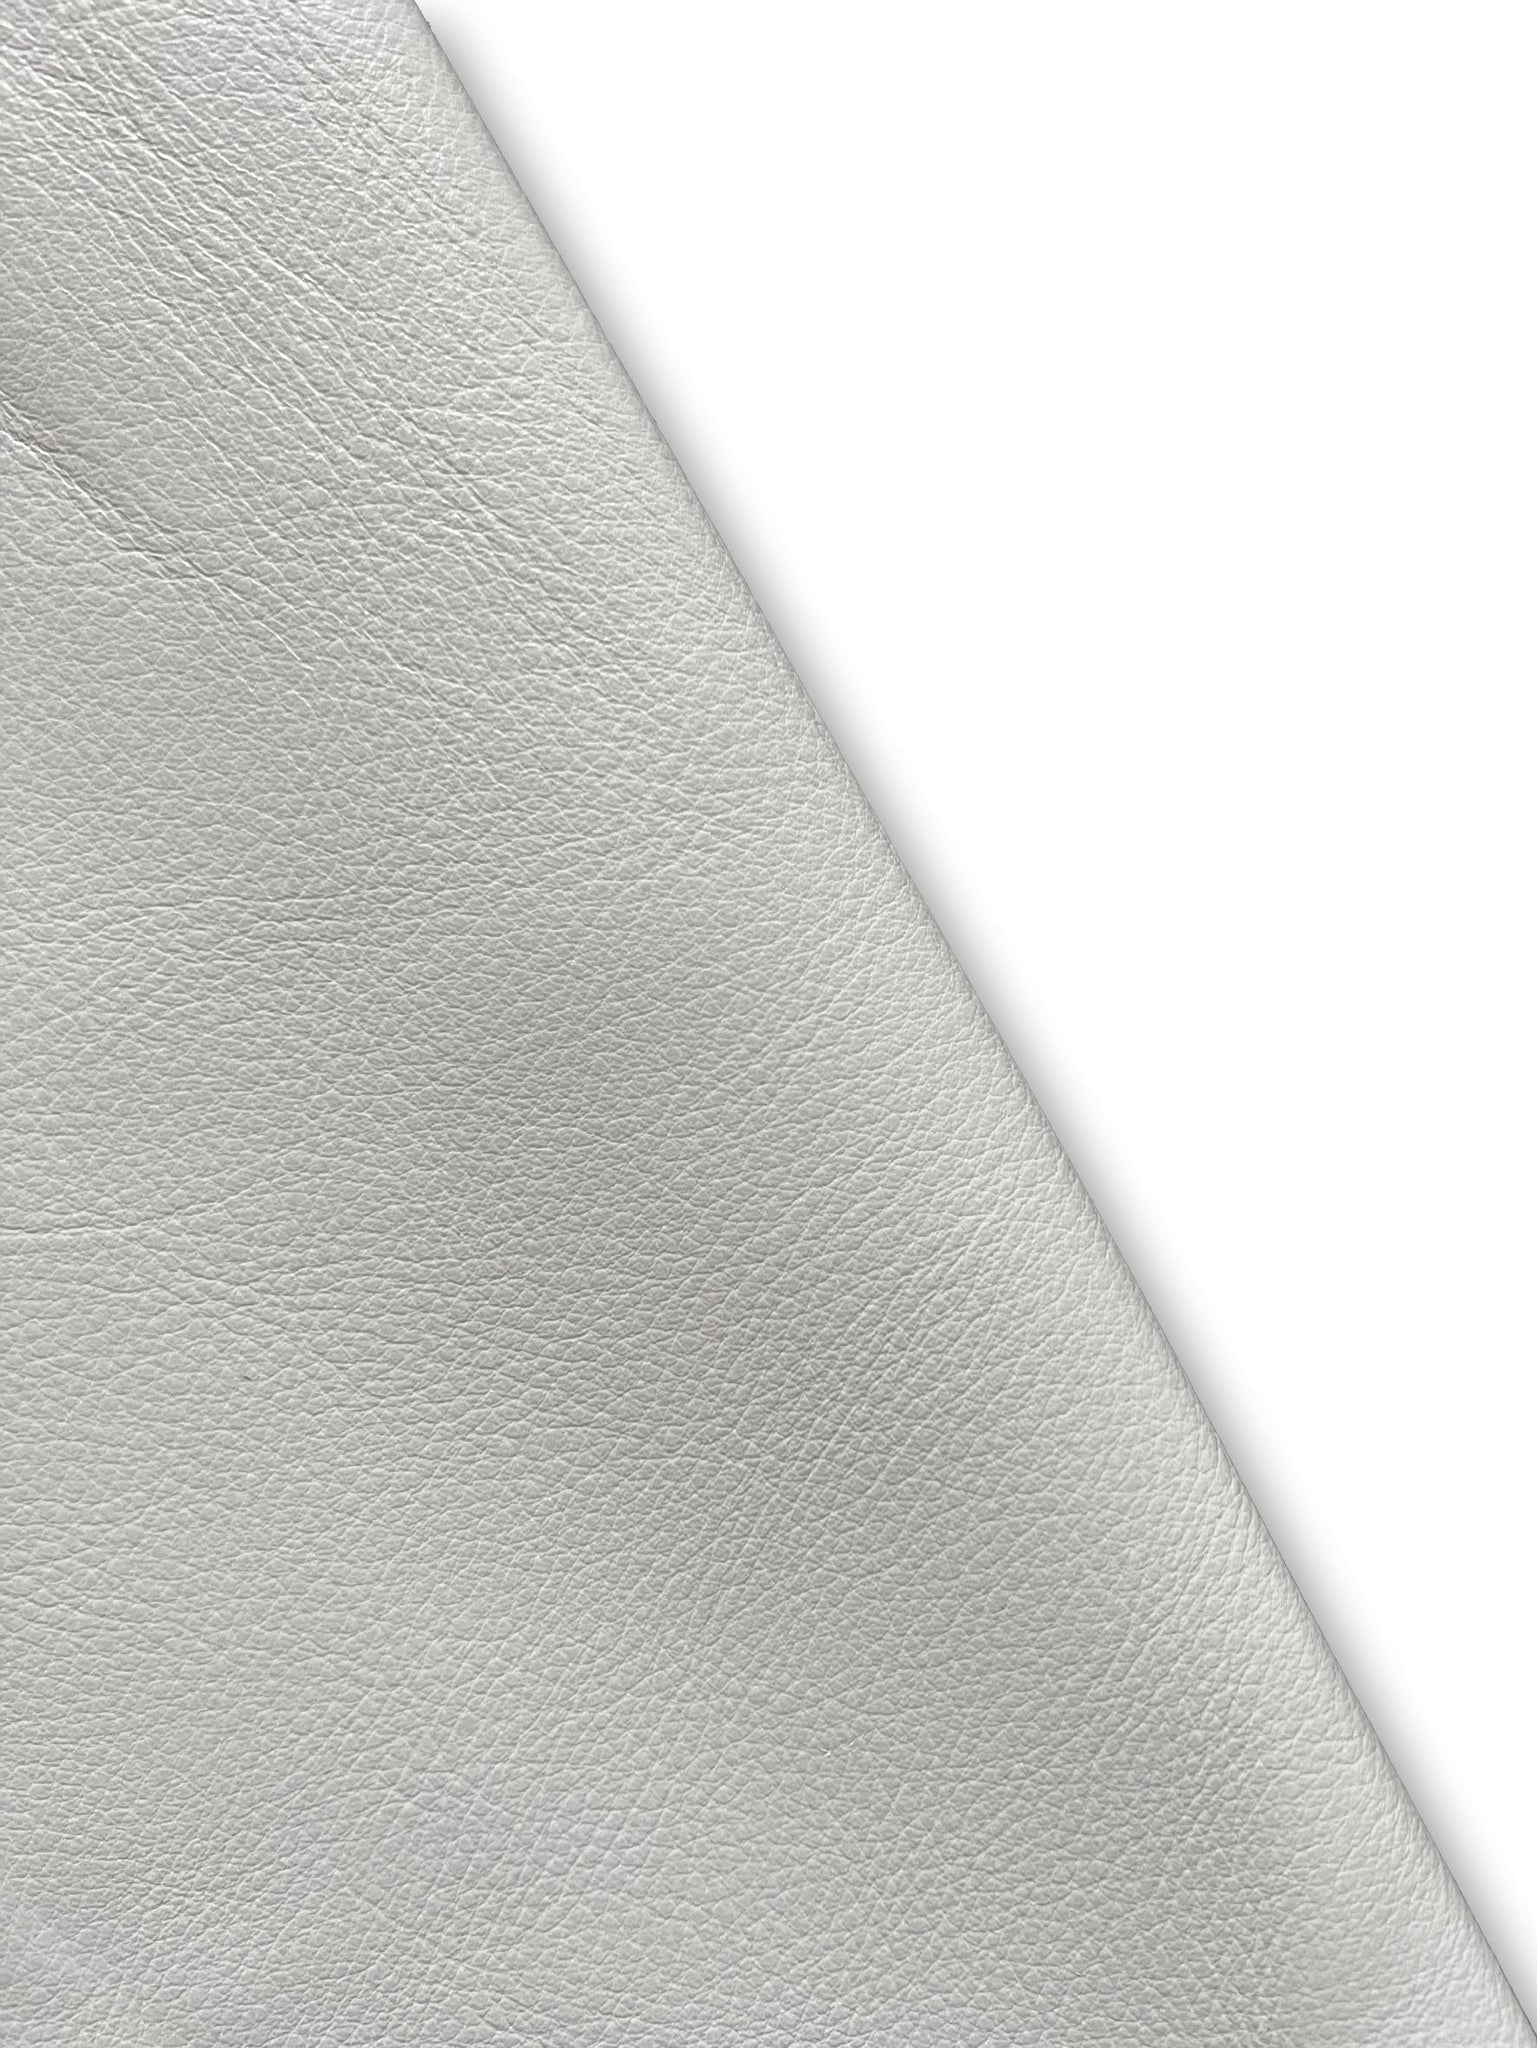 White Natural Grain Cowhide Leather Skins